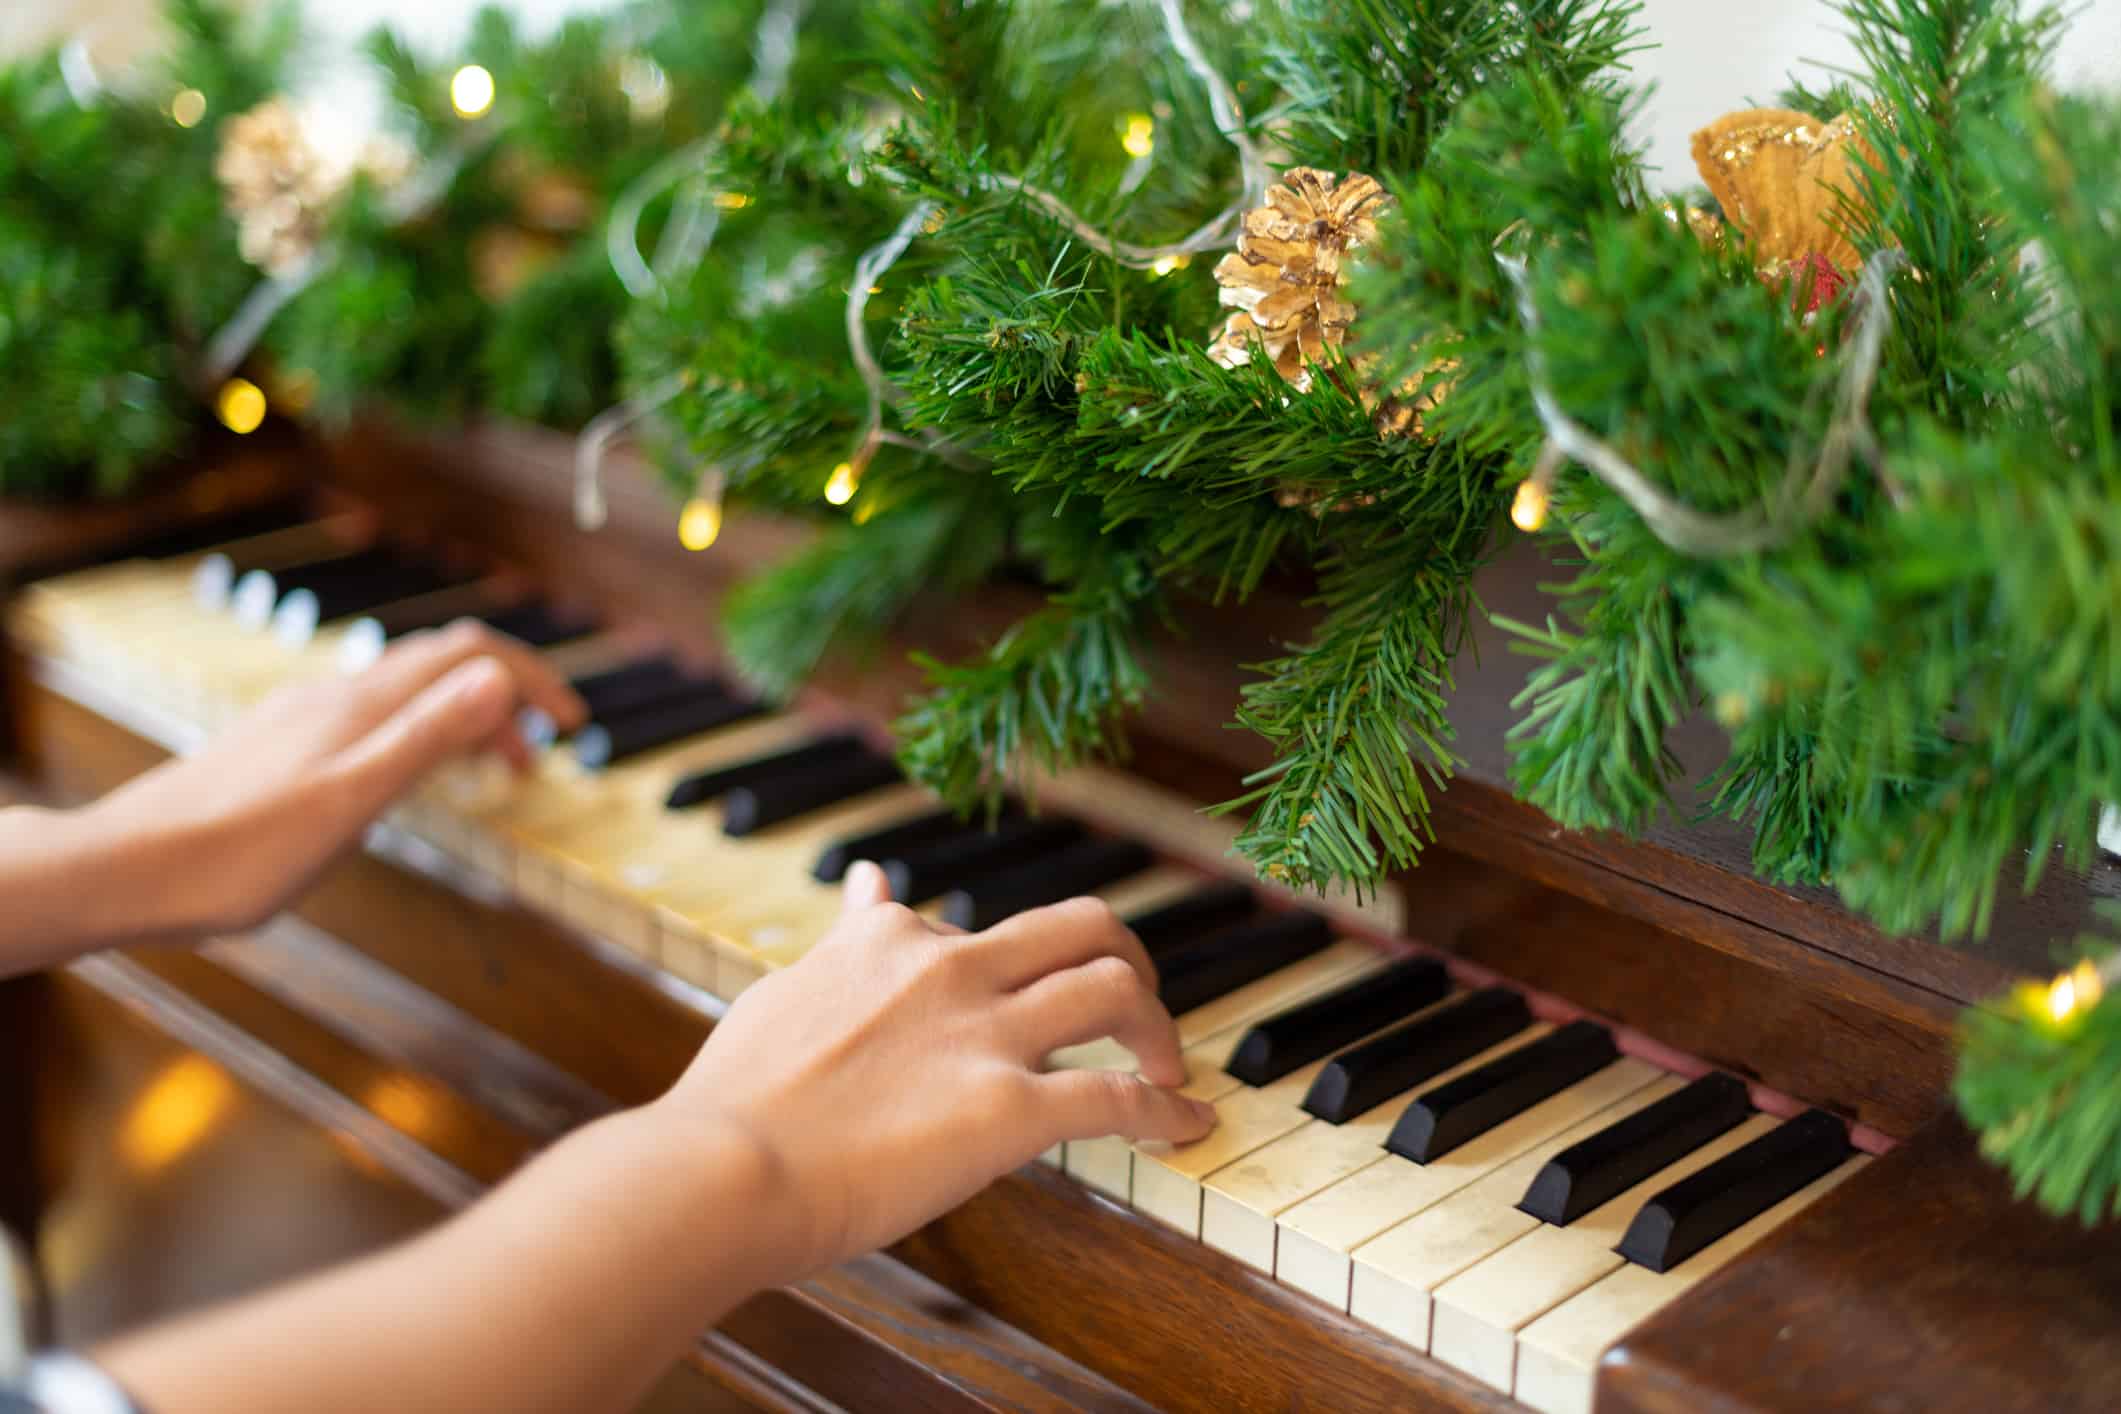 Piano decorated for Christmas for Christmas gift surprise for family